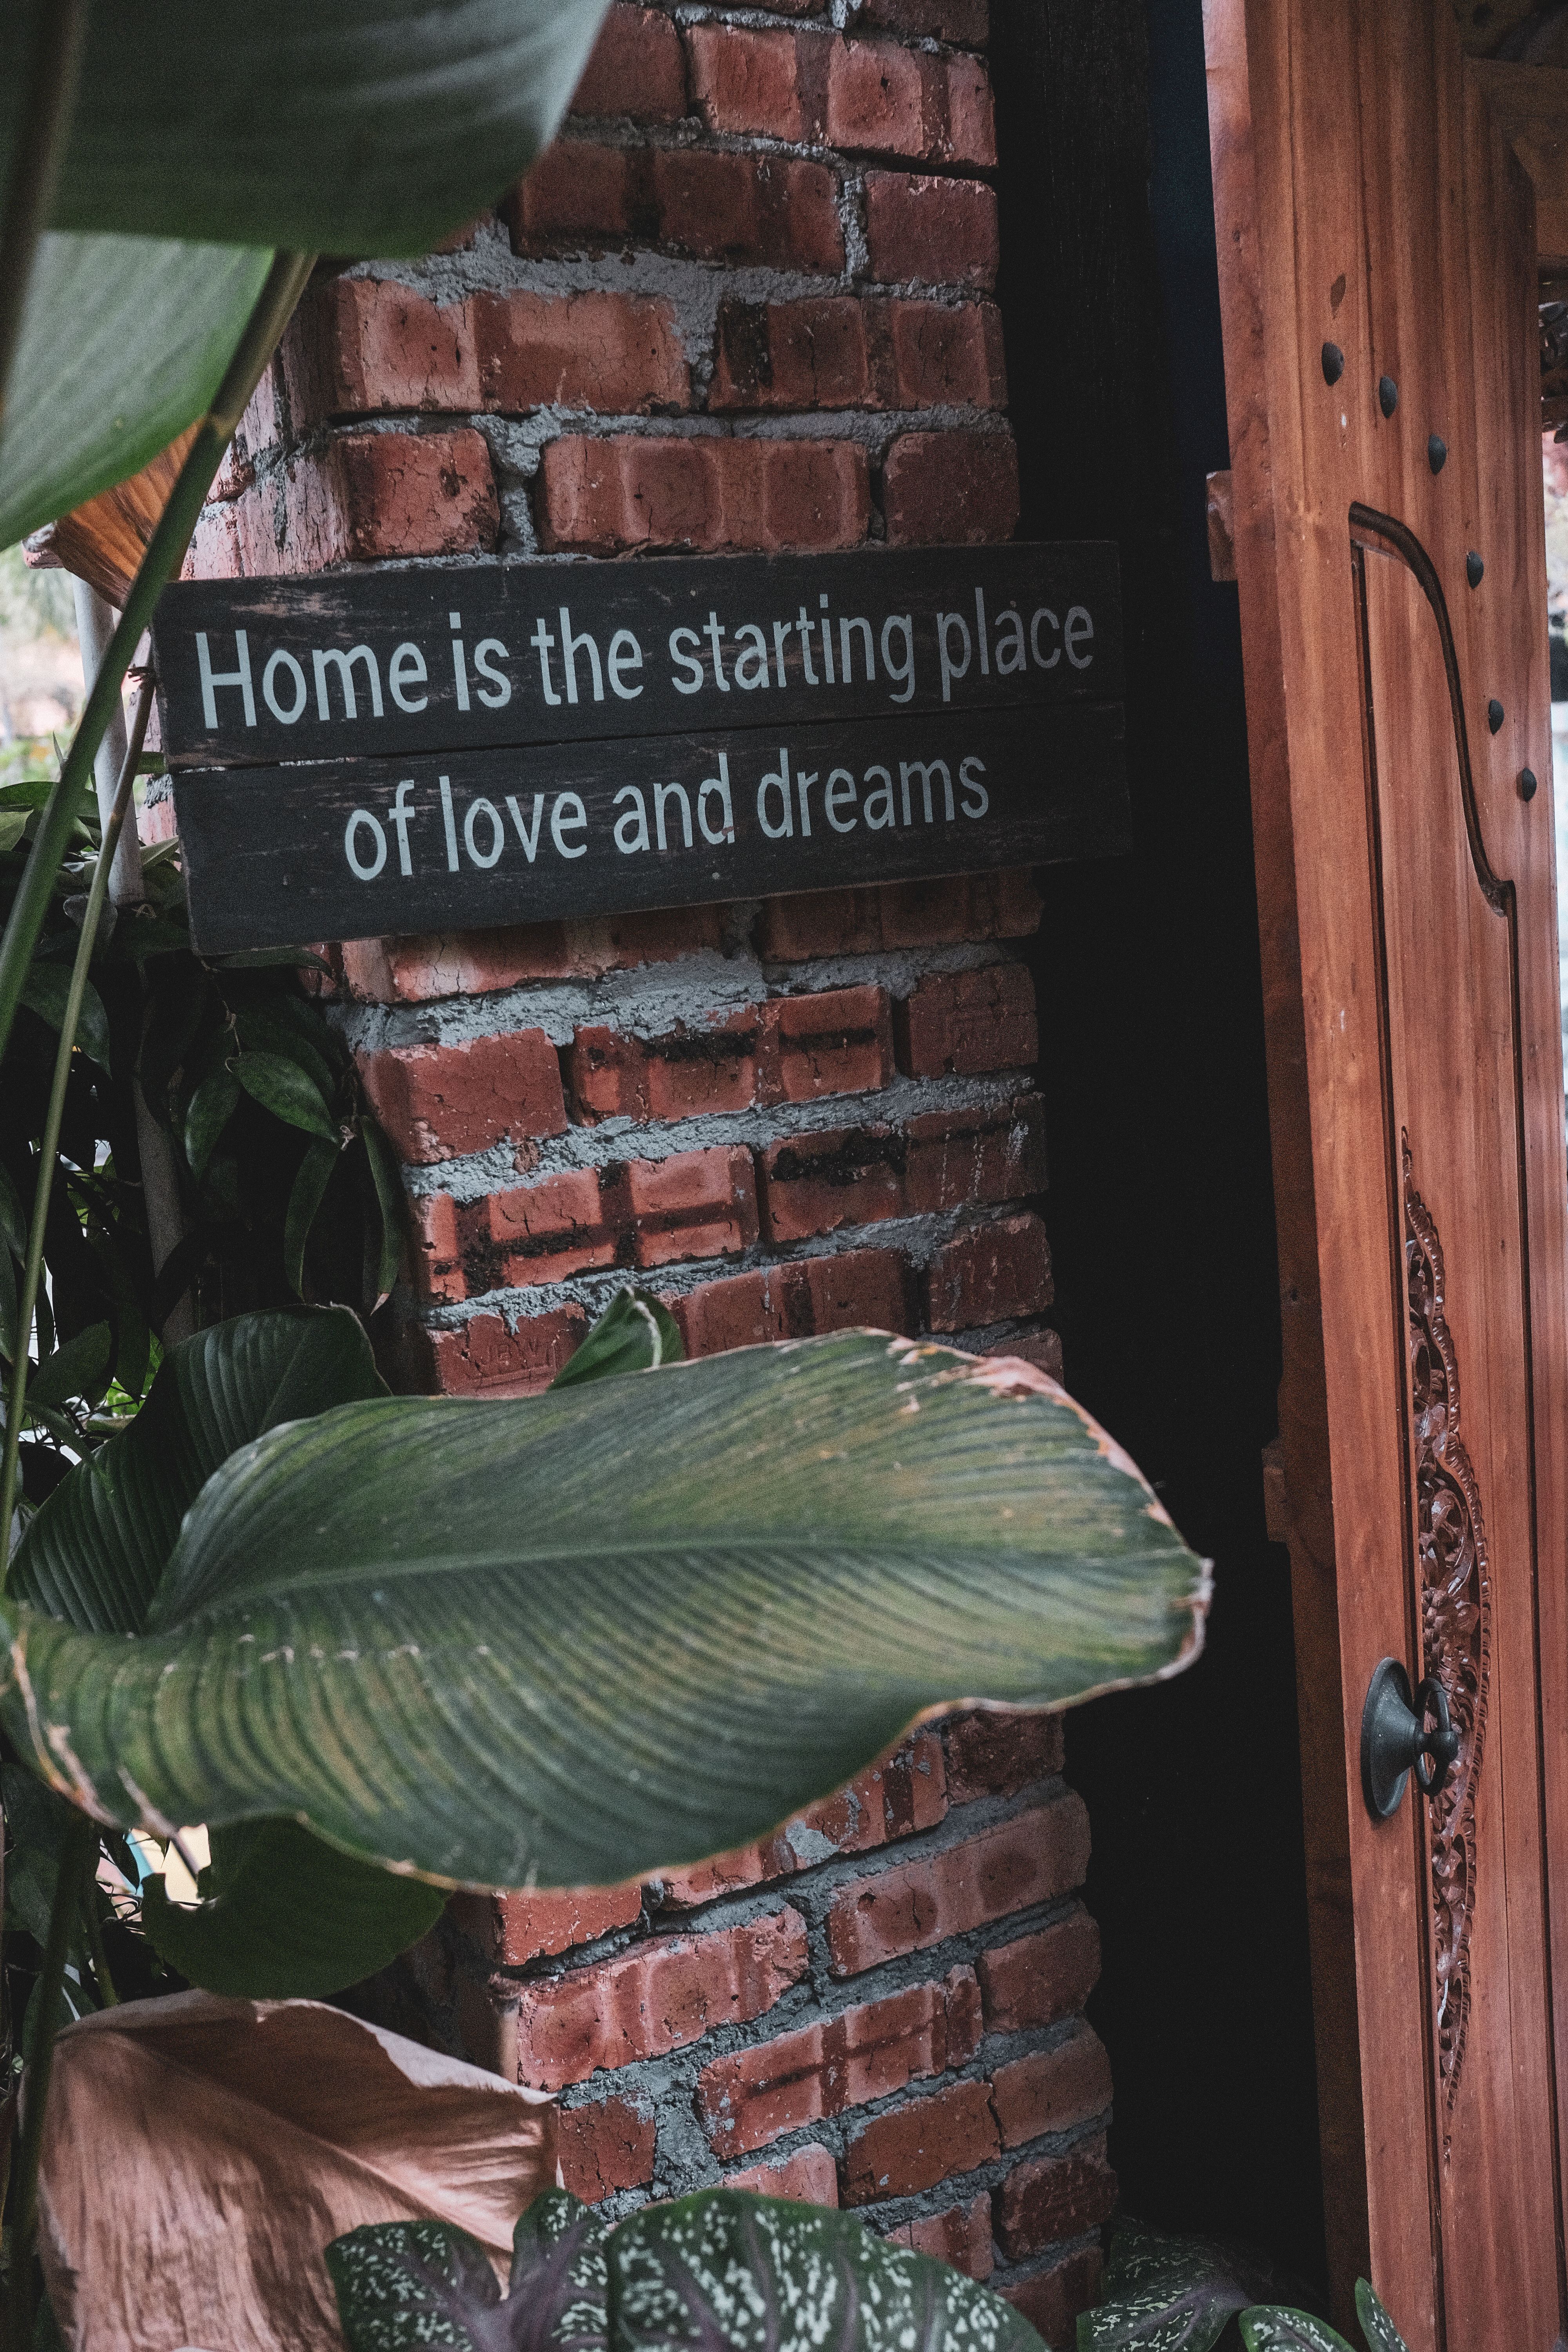 “Home is the starting place of love and dreams.” And no place better to begin than a home away from home.